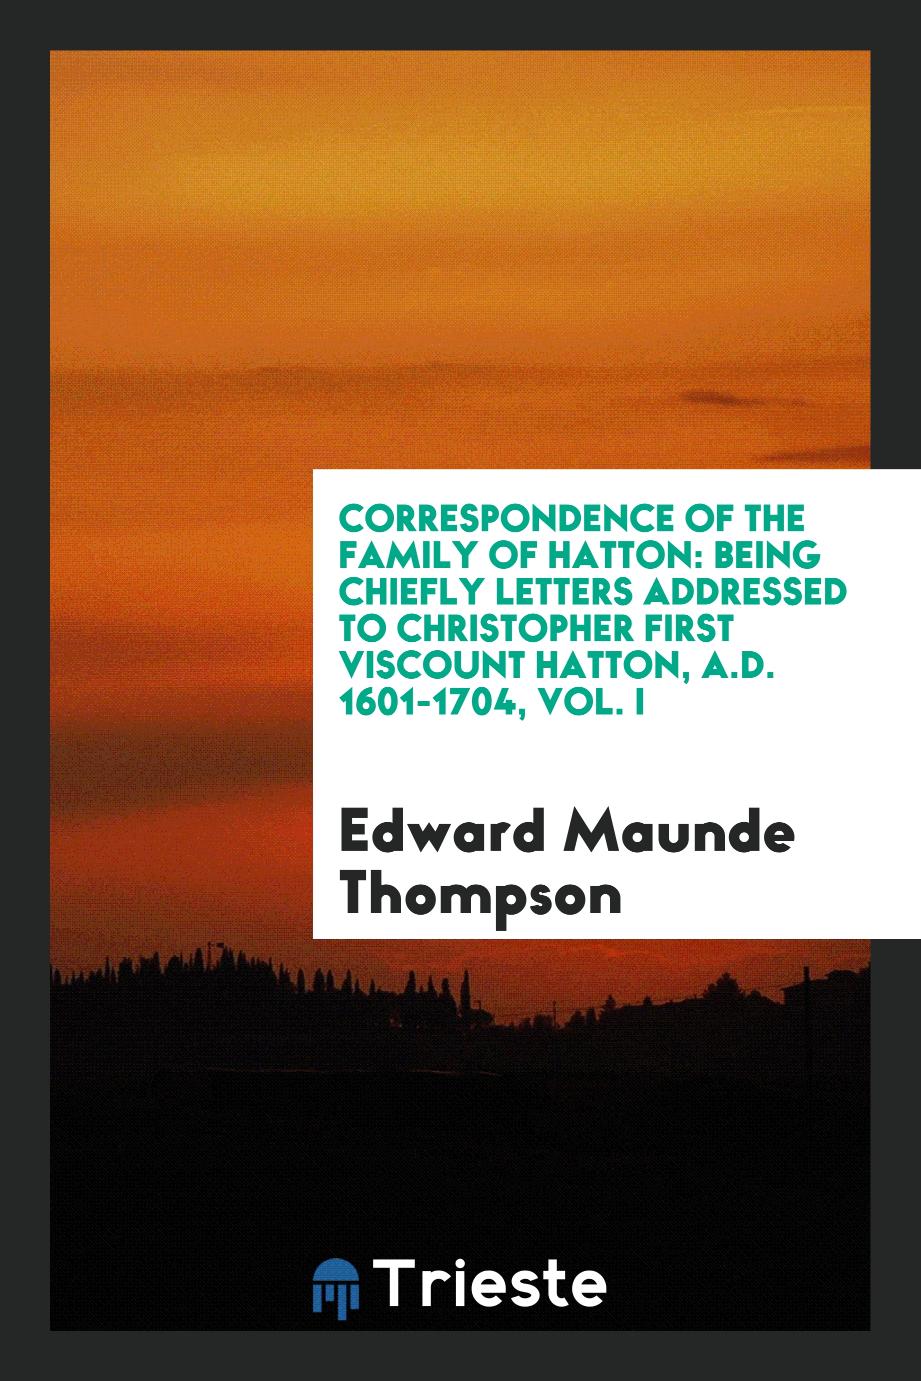 Edward Maunde Thompson - Correspondence of the Family of Hatton: Being Chiefly Letters Addressed to Christopher First Viscount Hatton, A.D. 1601-1704, Vol. I